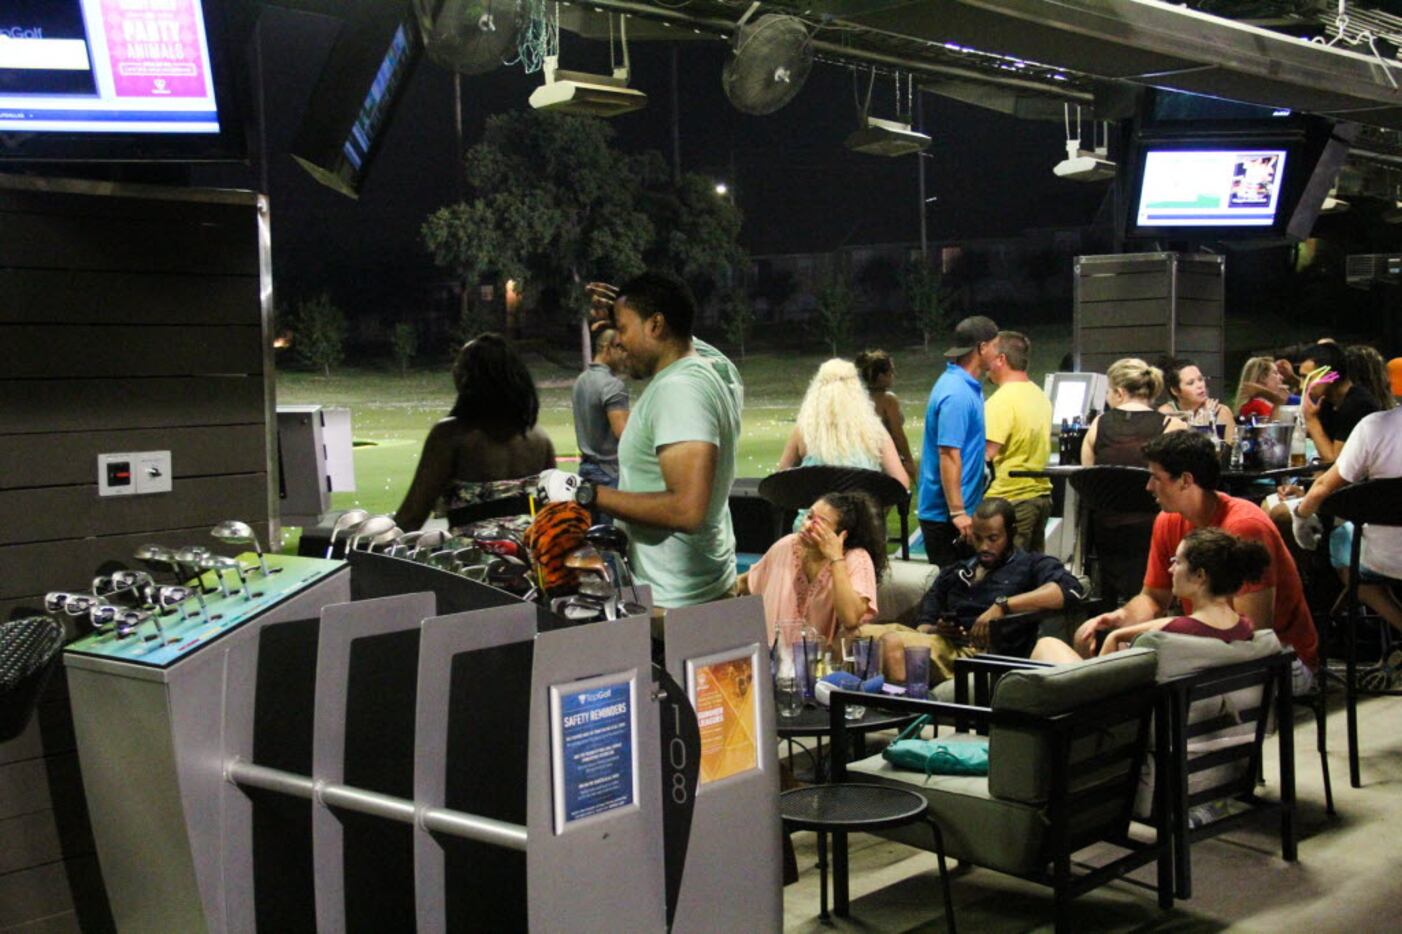 Mathletes vs Athletes was the theme party at TopGolf Dallas on June 28, 2014